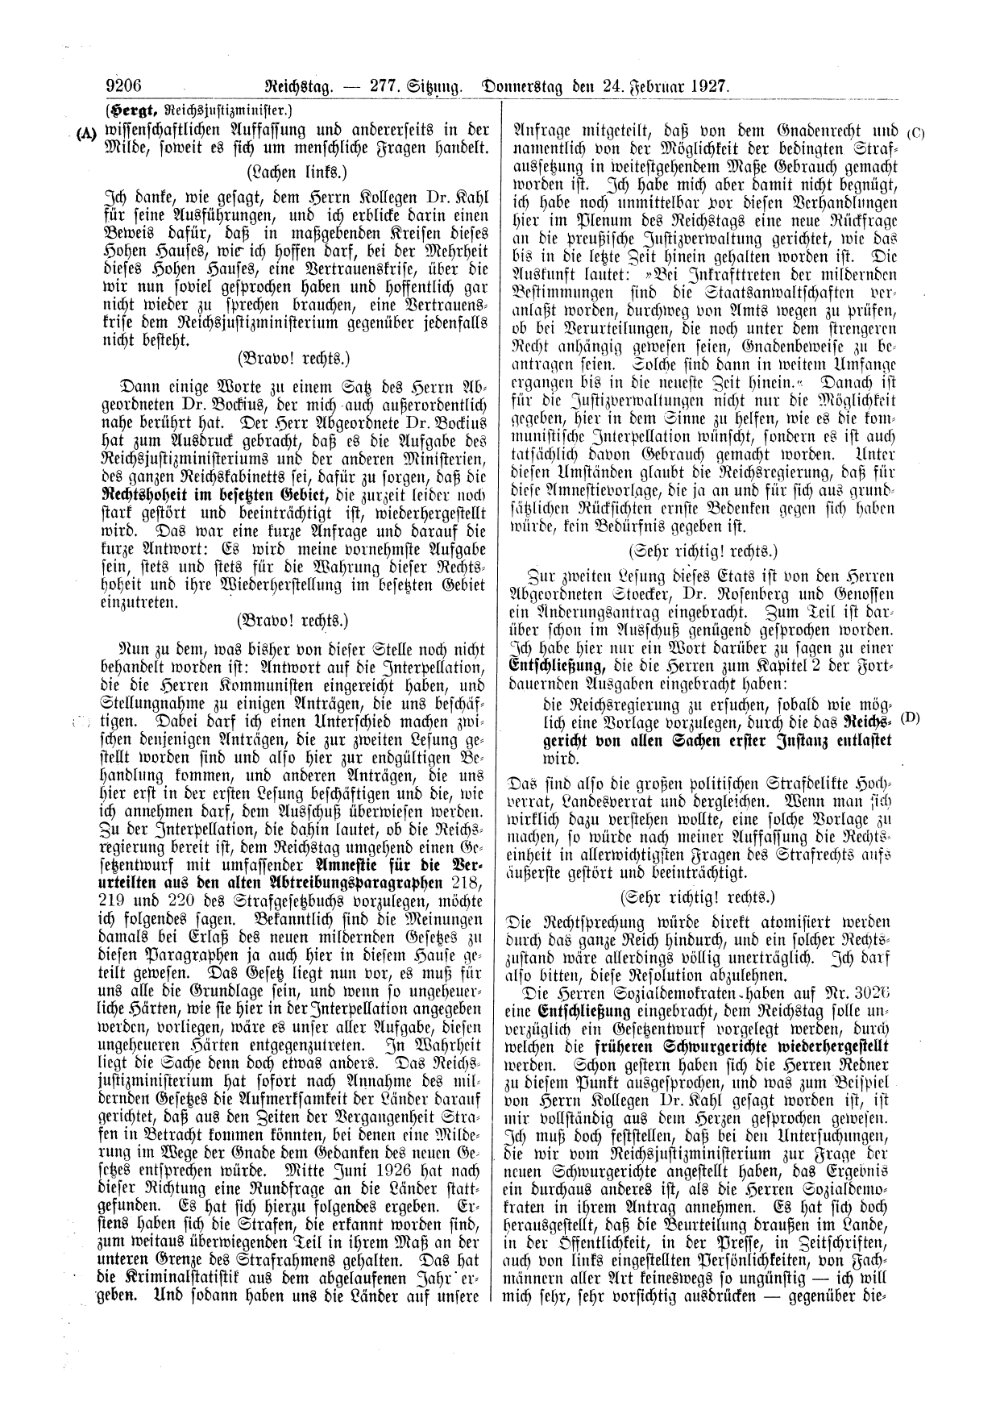 Scan of page 9206